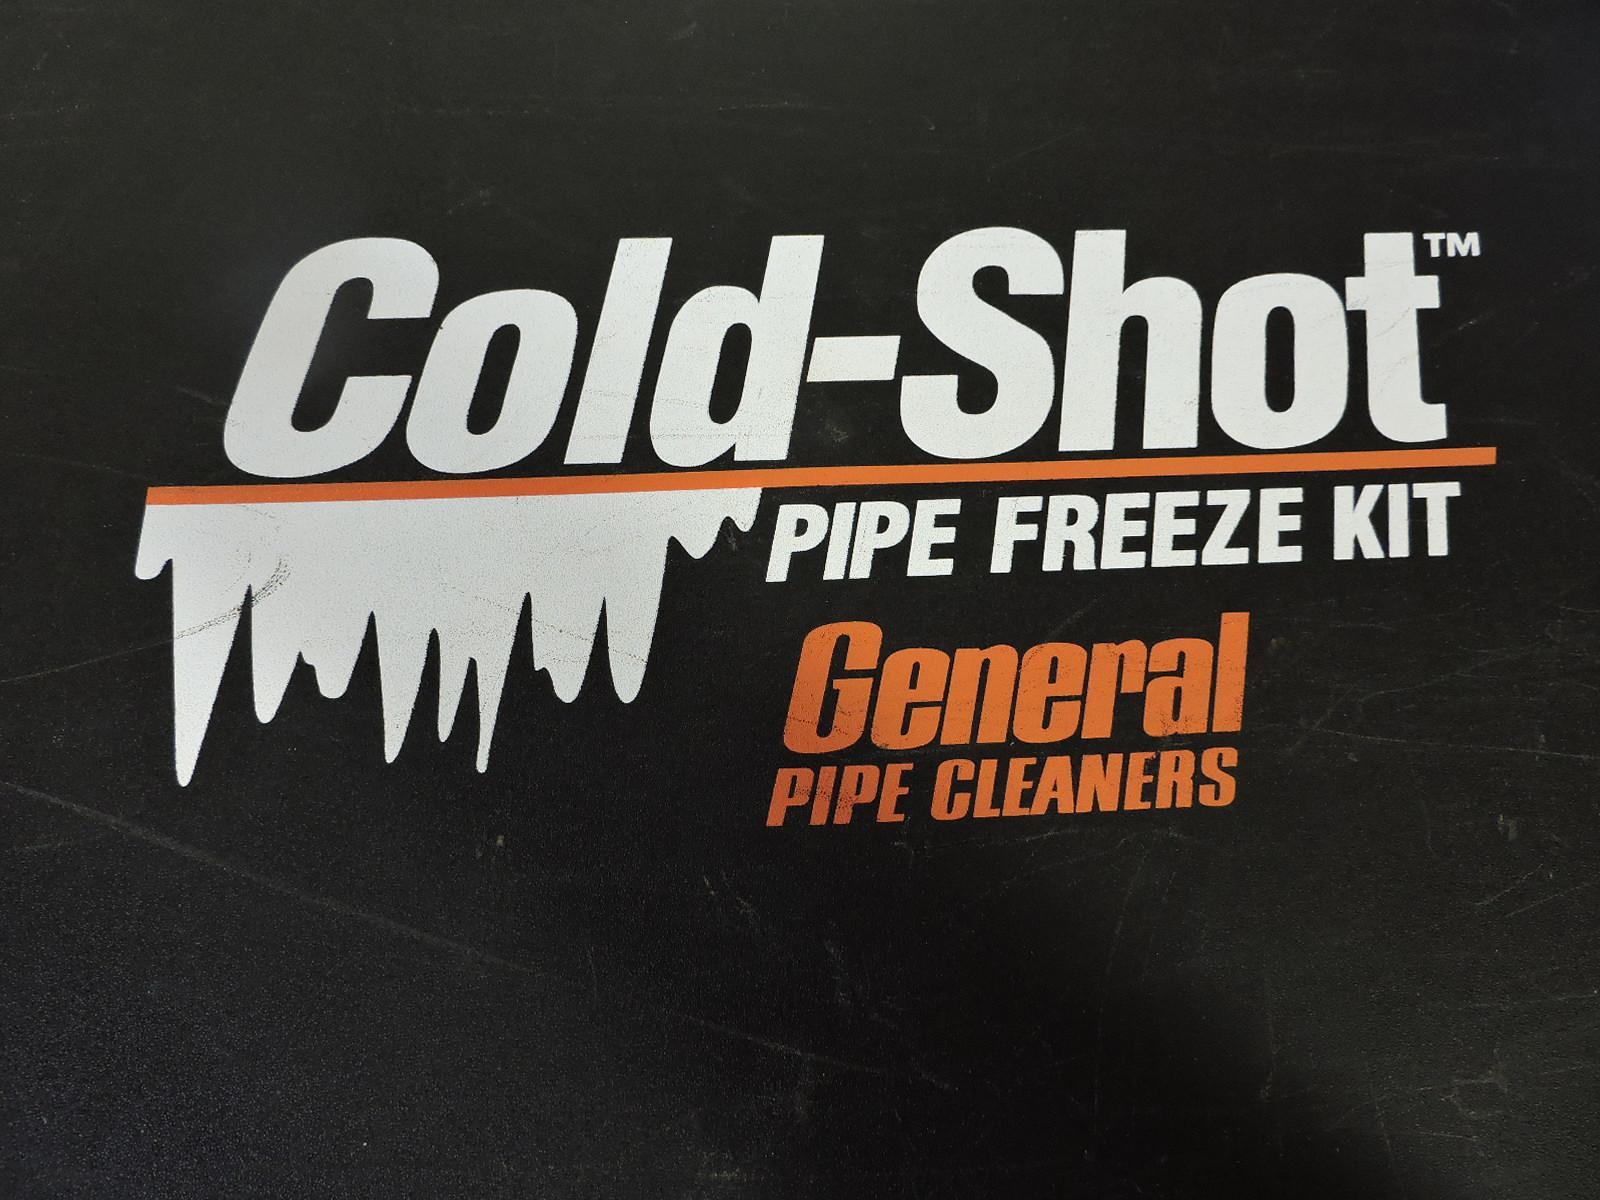 General Pipe Cleaners Brand:  COLD-SHOT Pipe Freeze Kit - in Case